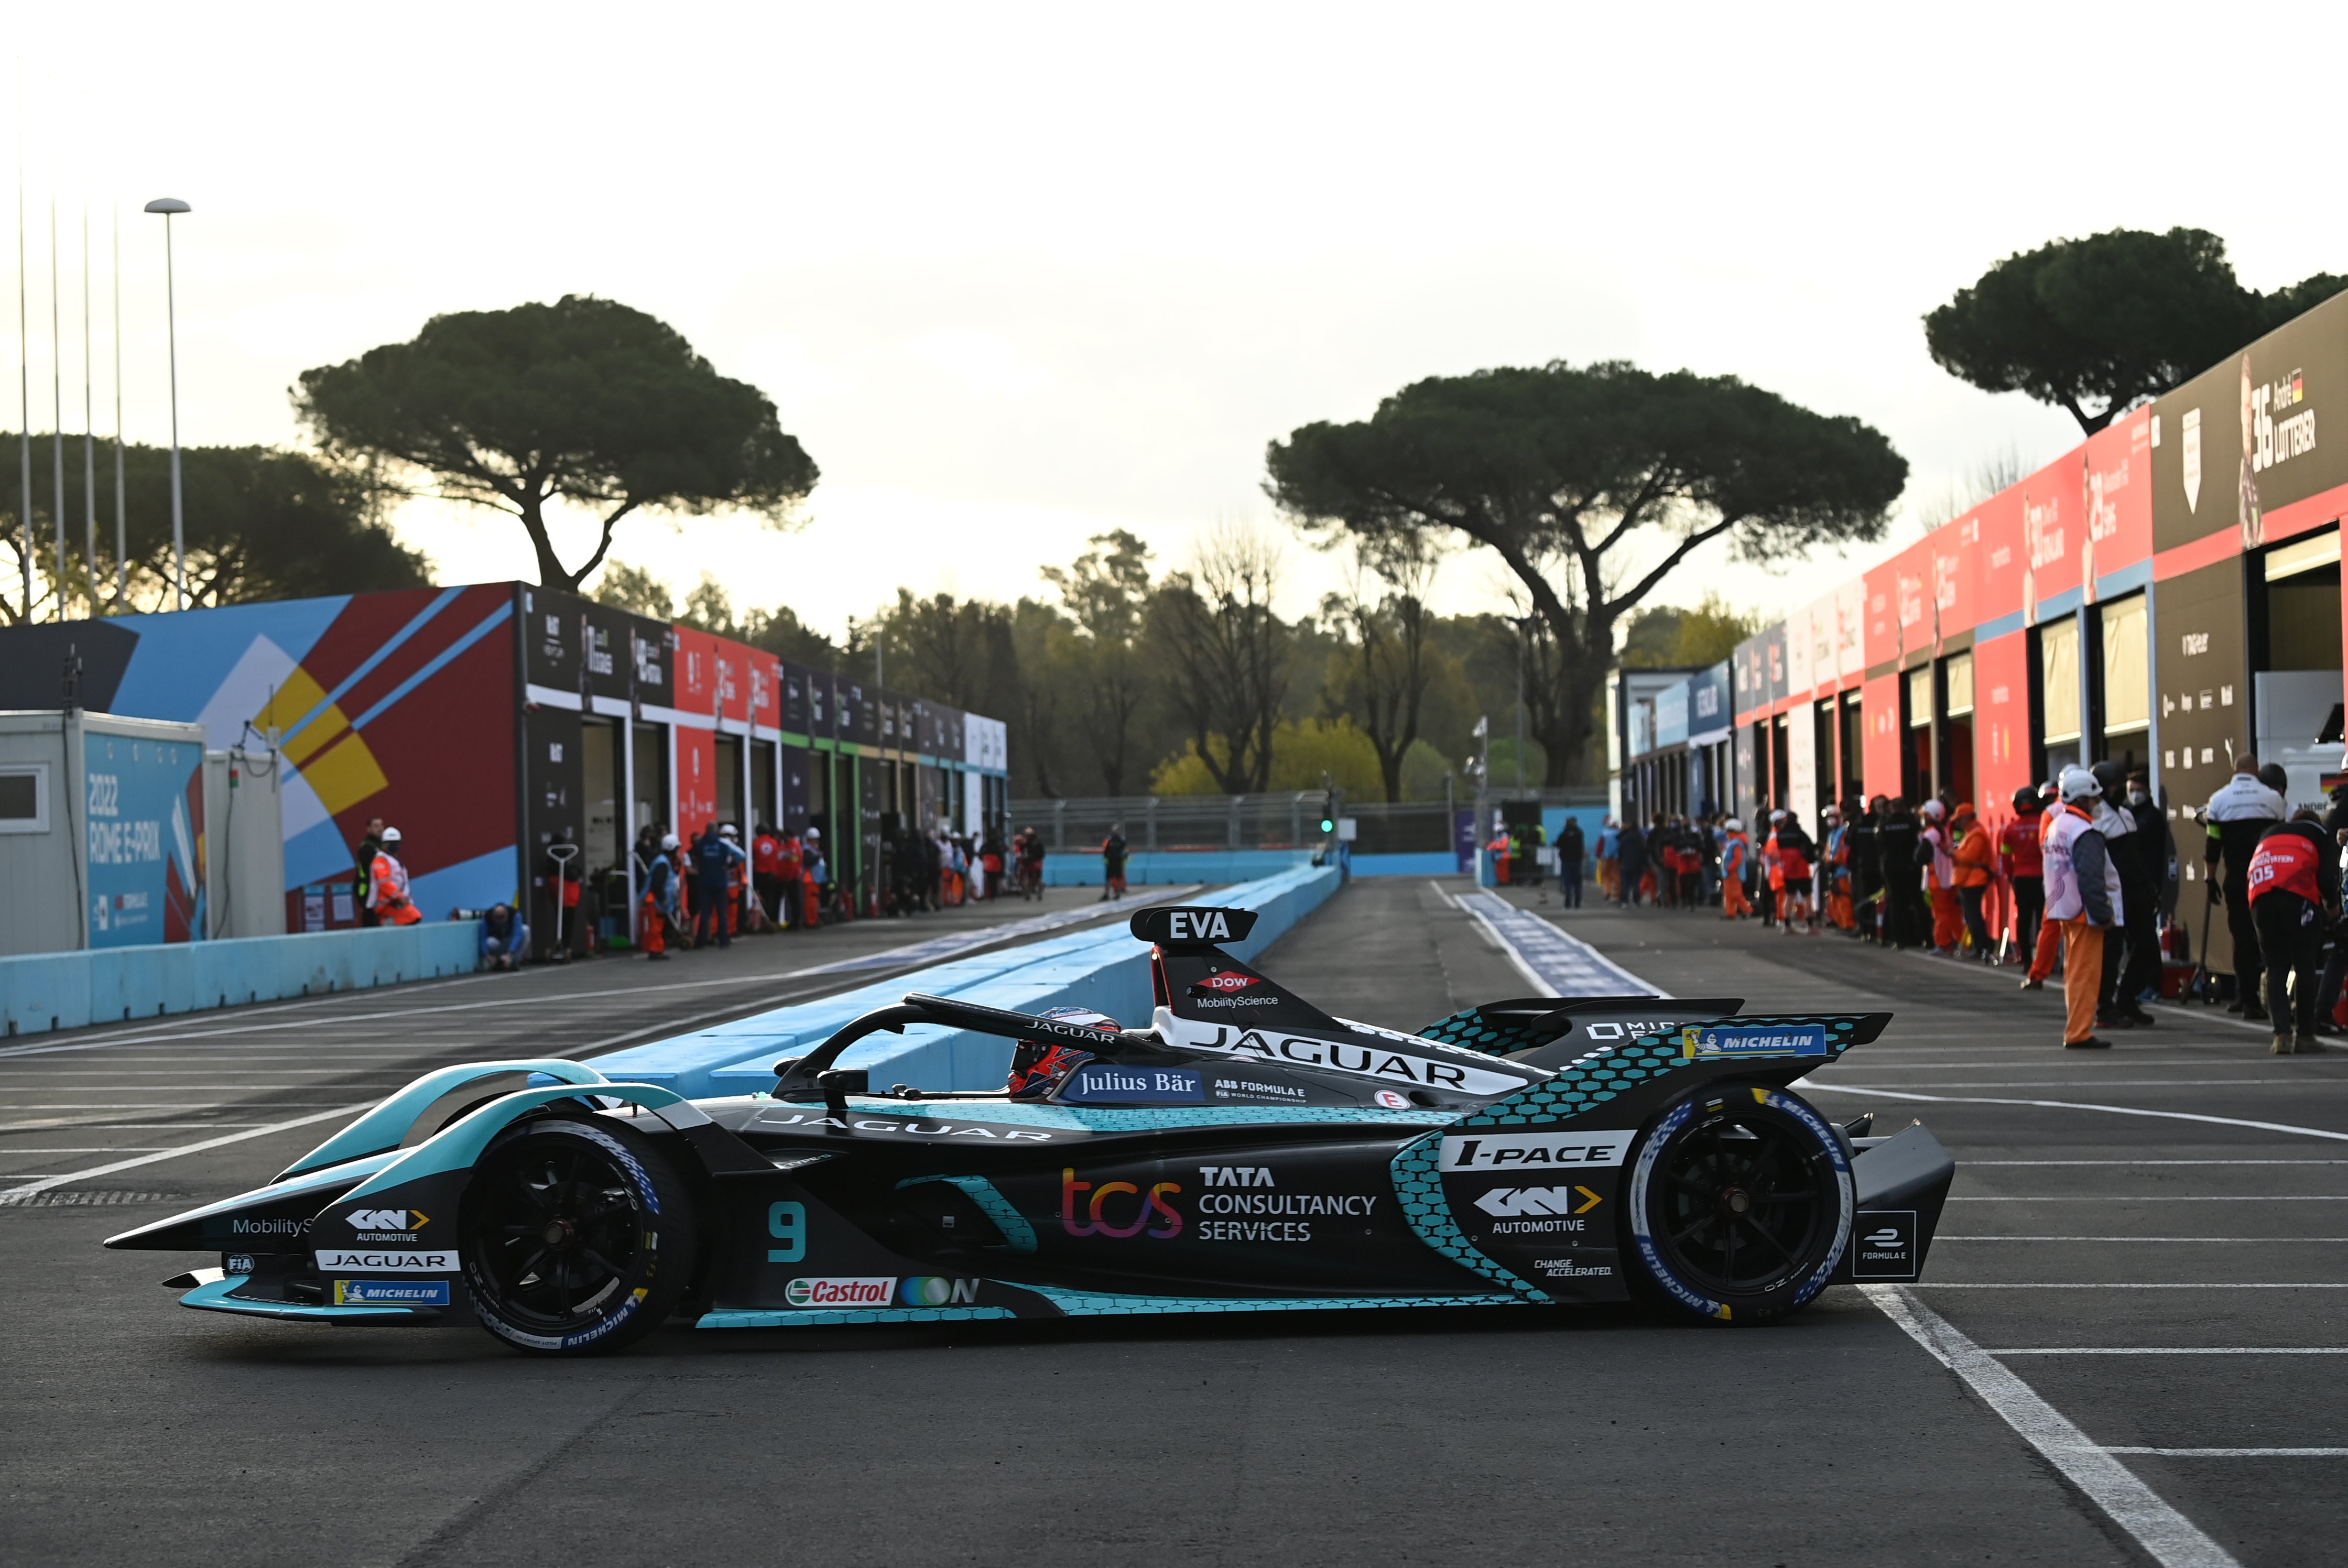 Rome plays home to a Formula E race for the seventh time this weekend